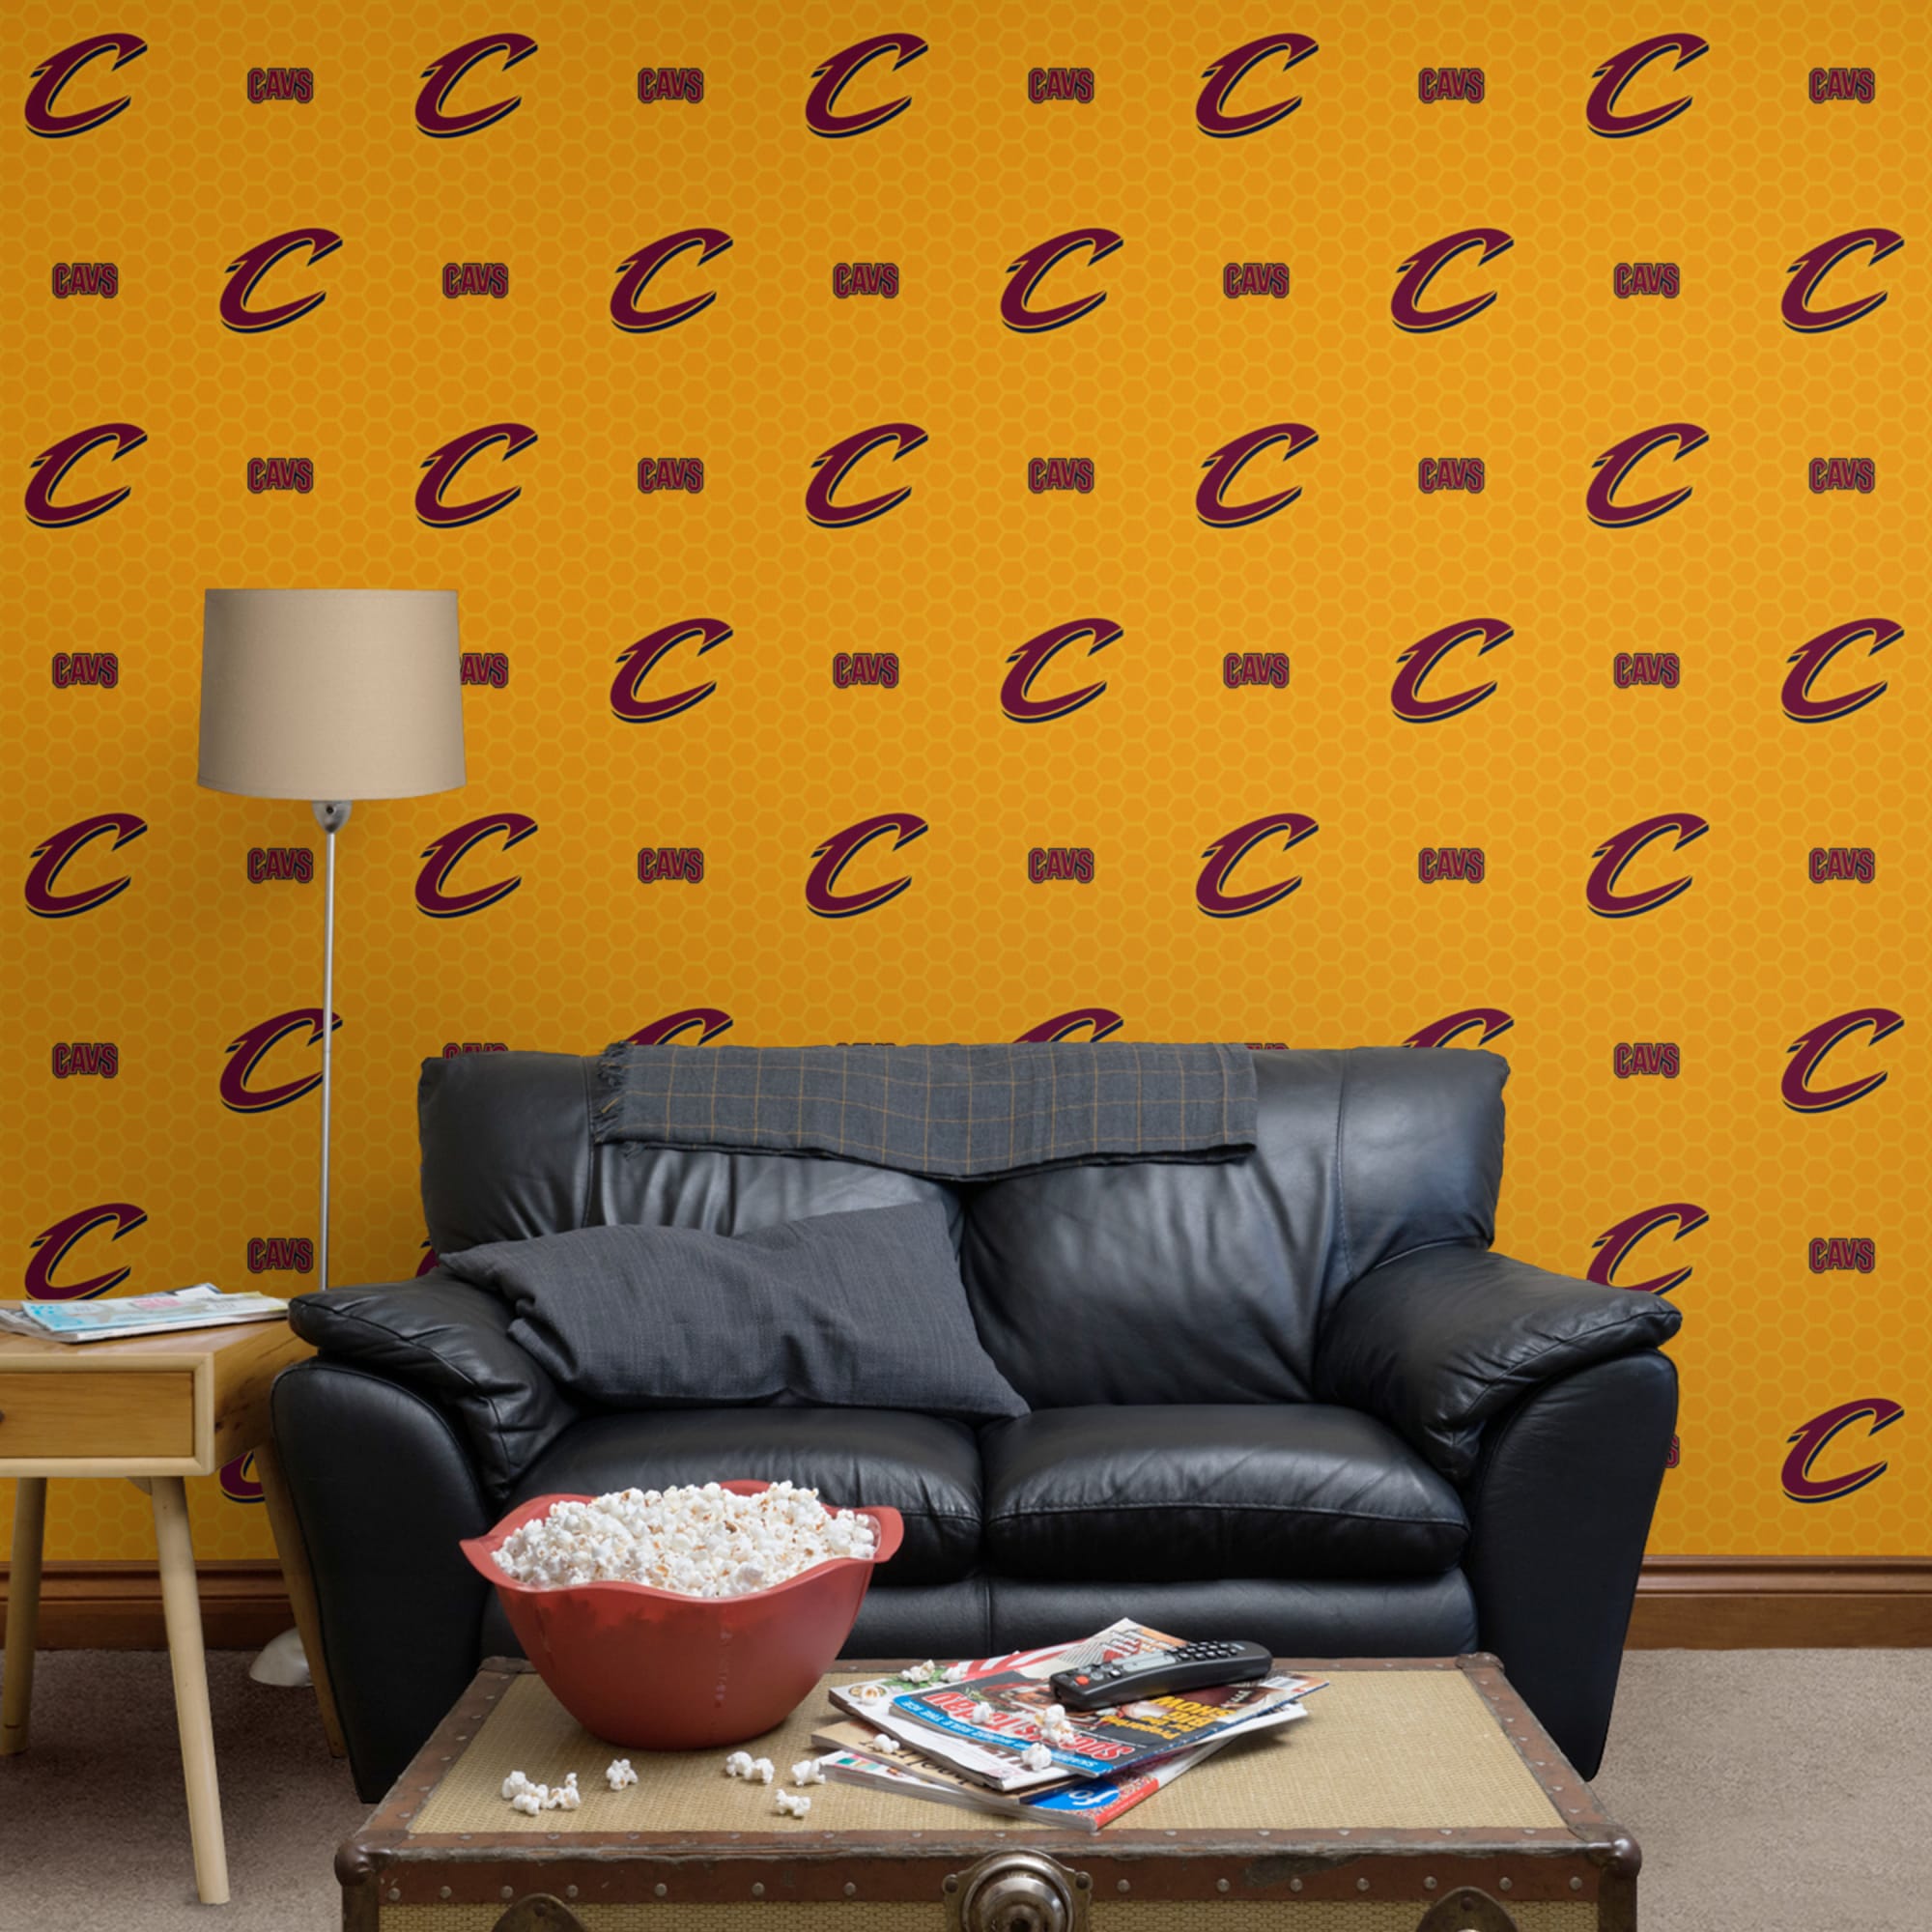 Cleveland Cavaliers: Logo Pattern - Officially Licensed Removable Wallpaper 12" x 12" Sample by Fathead